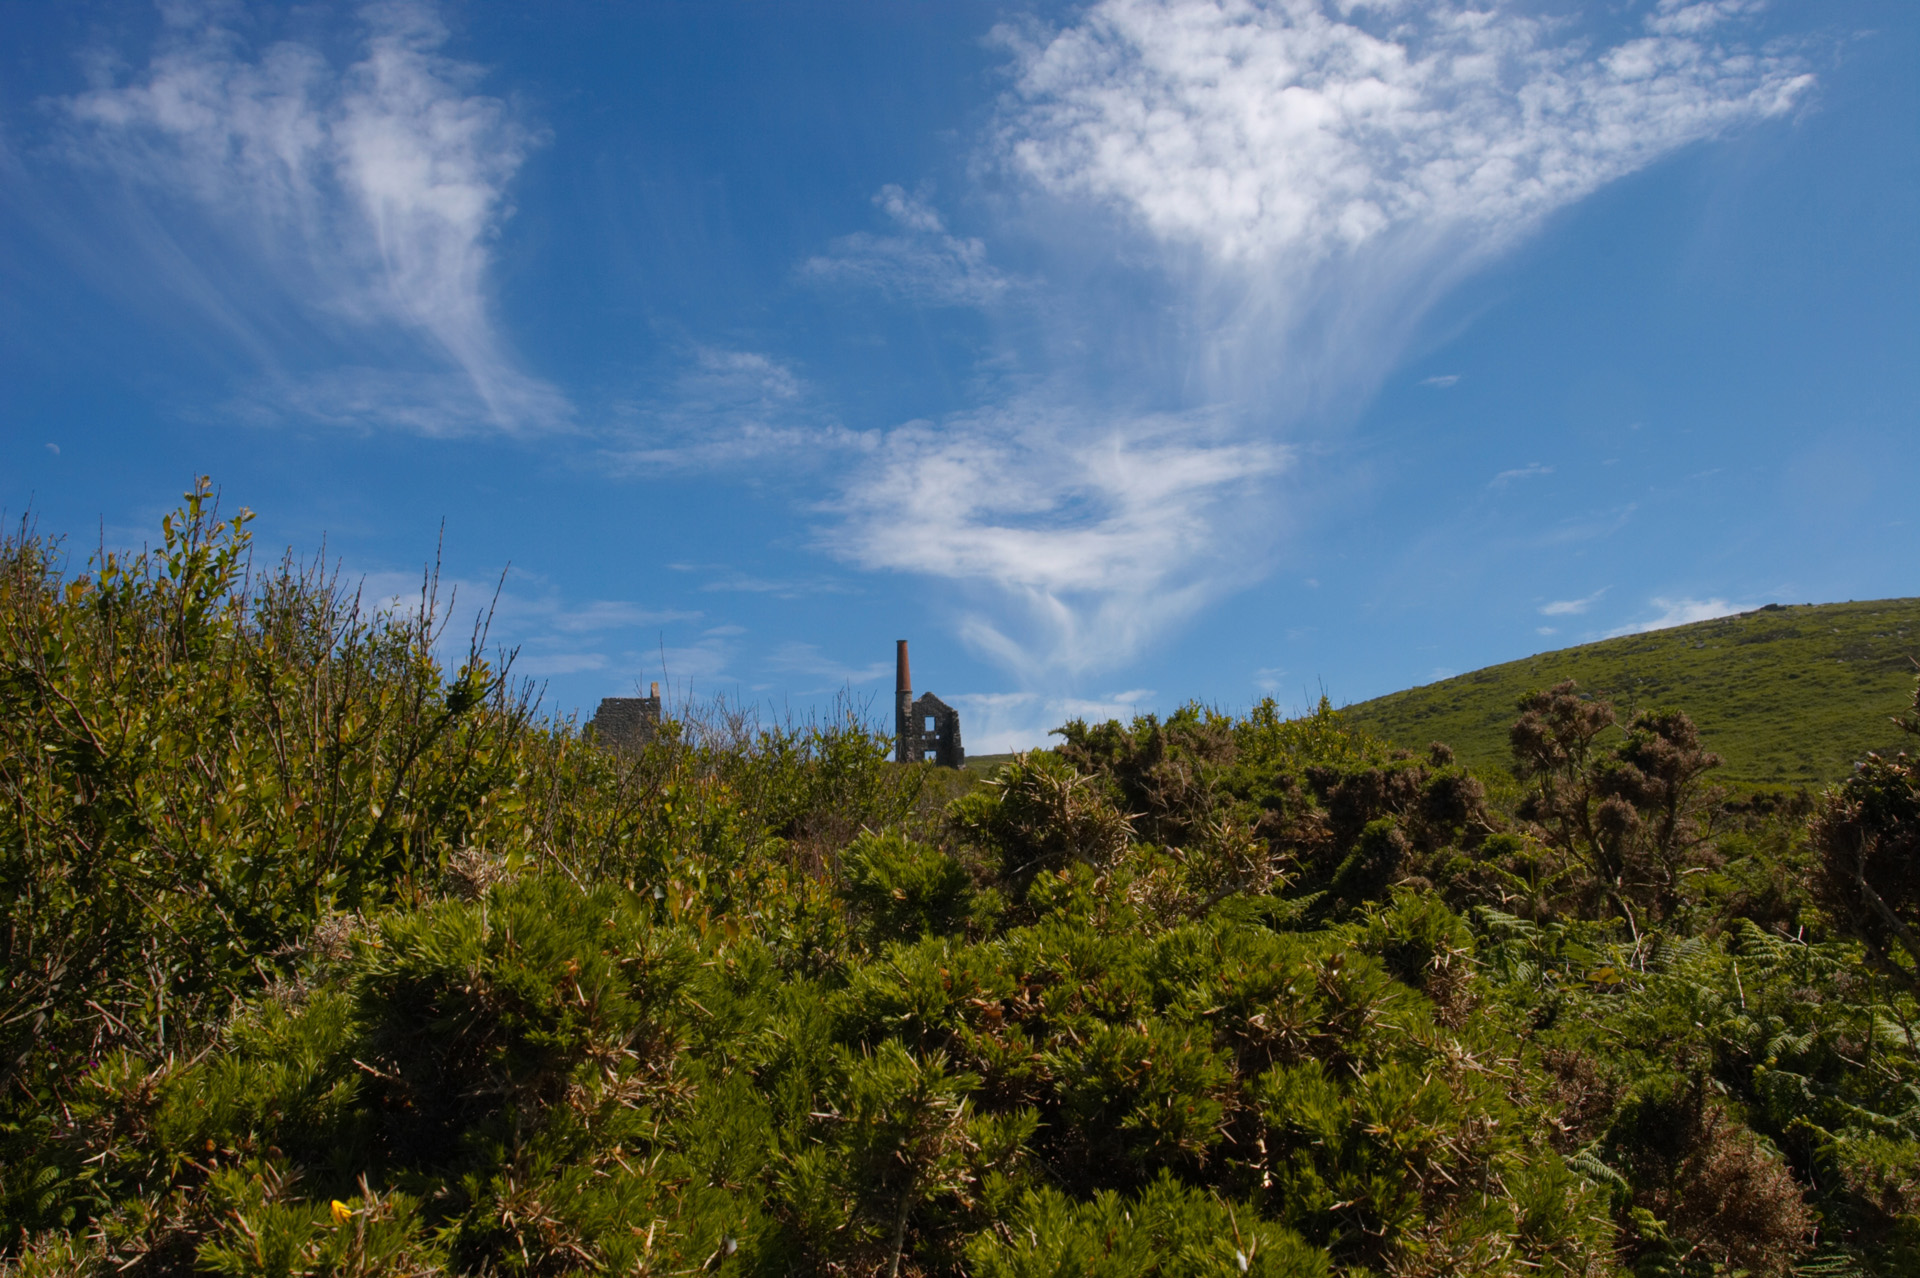 Carn Galver Tin Mine viewed across the gorse bushes, Penwith, Co